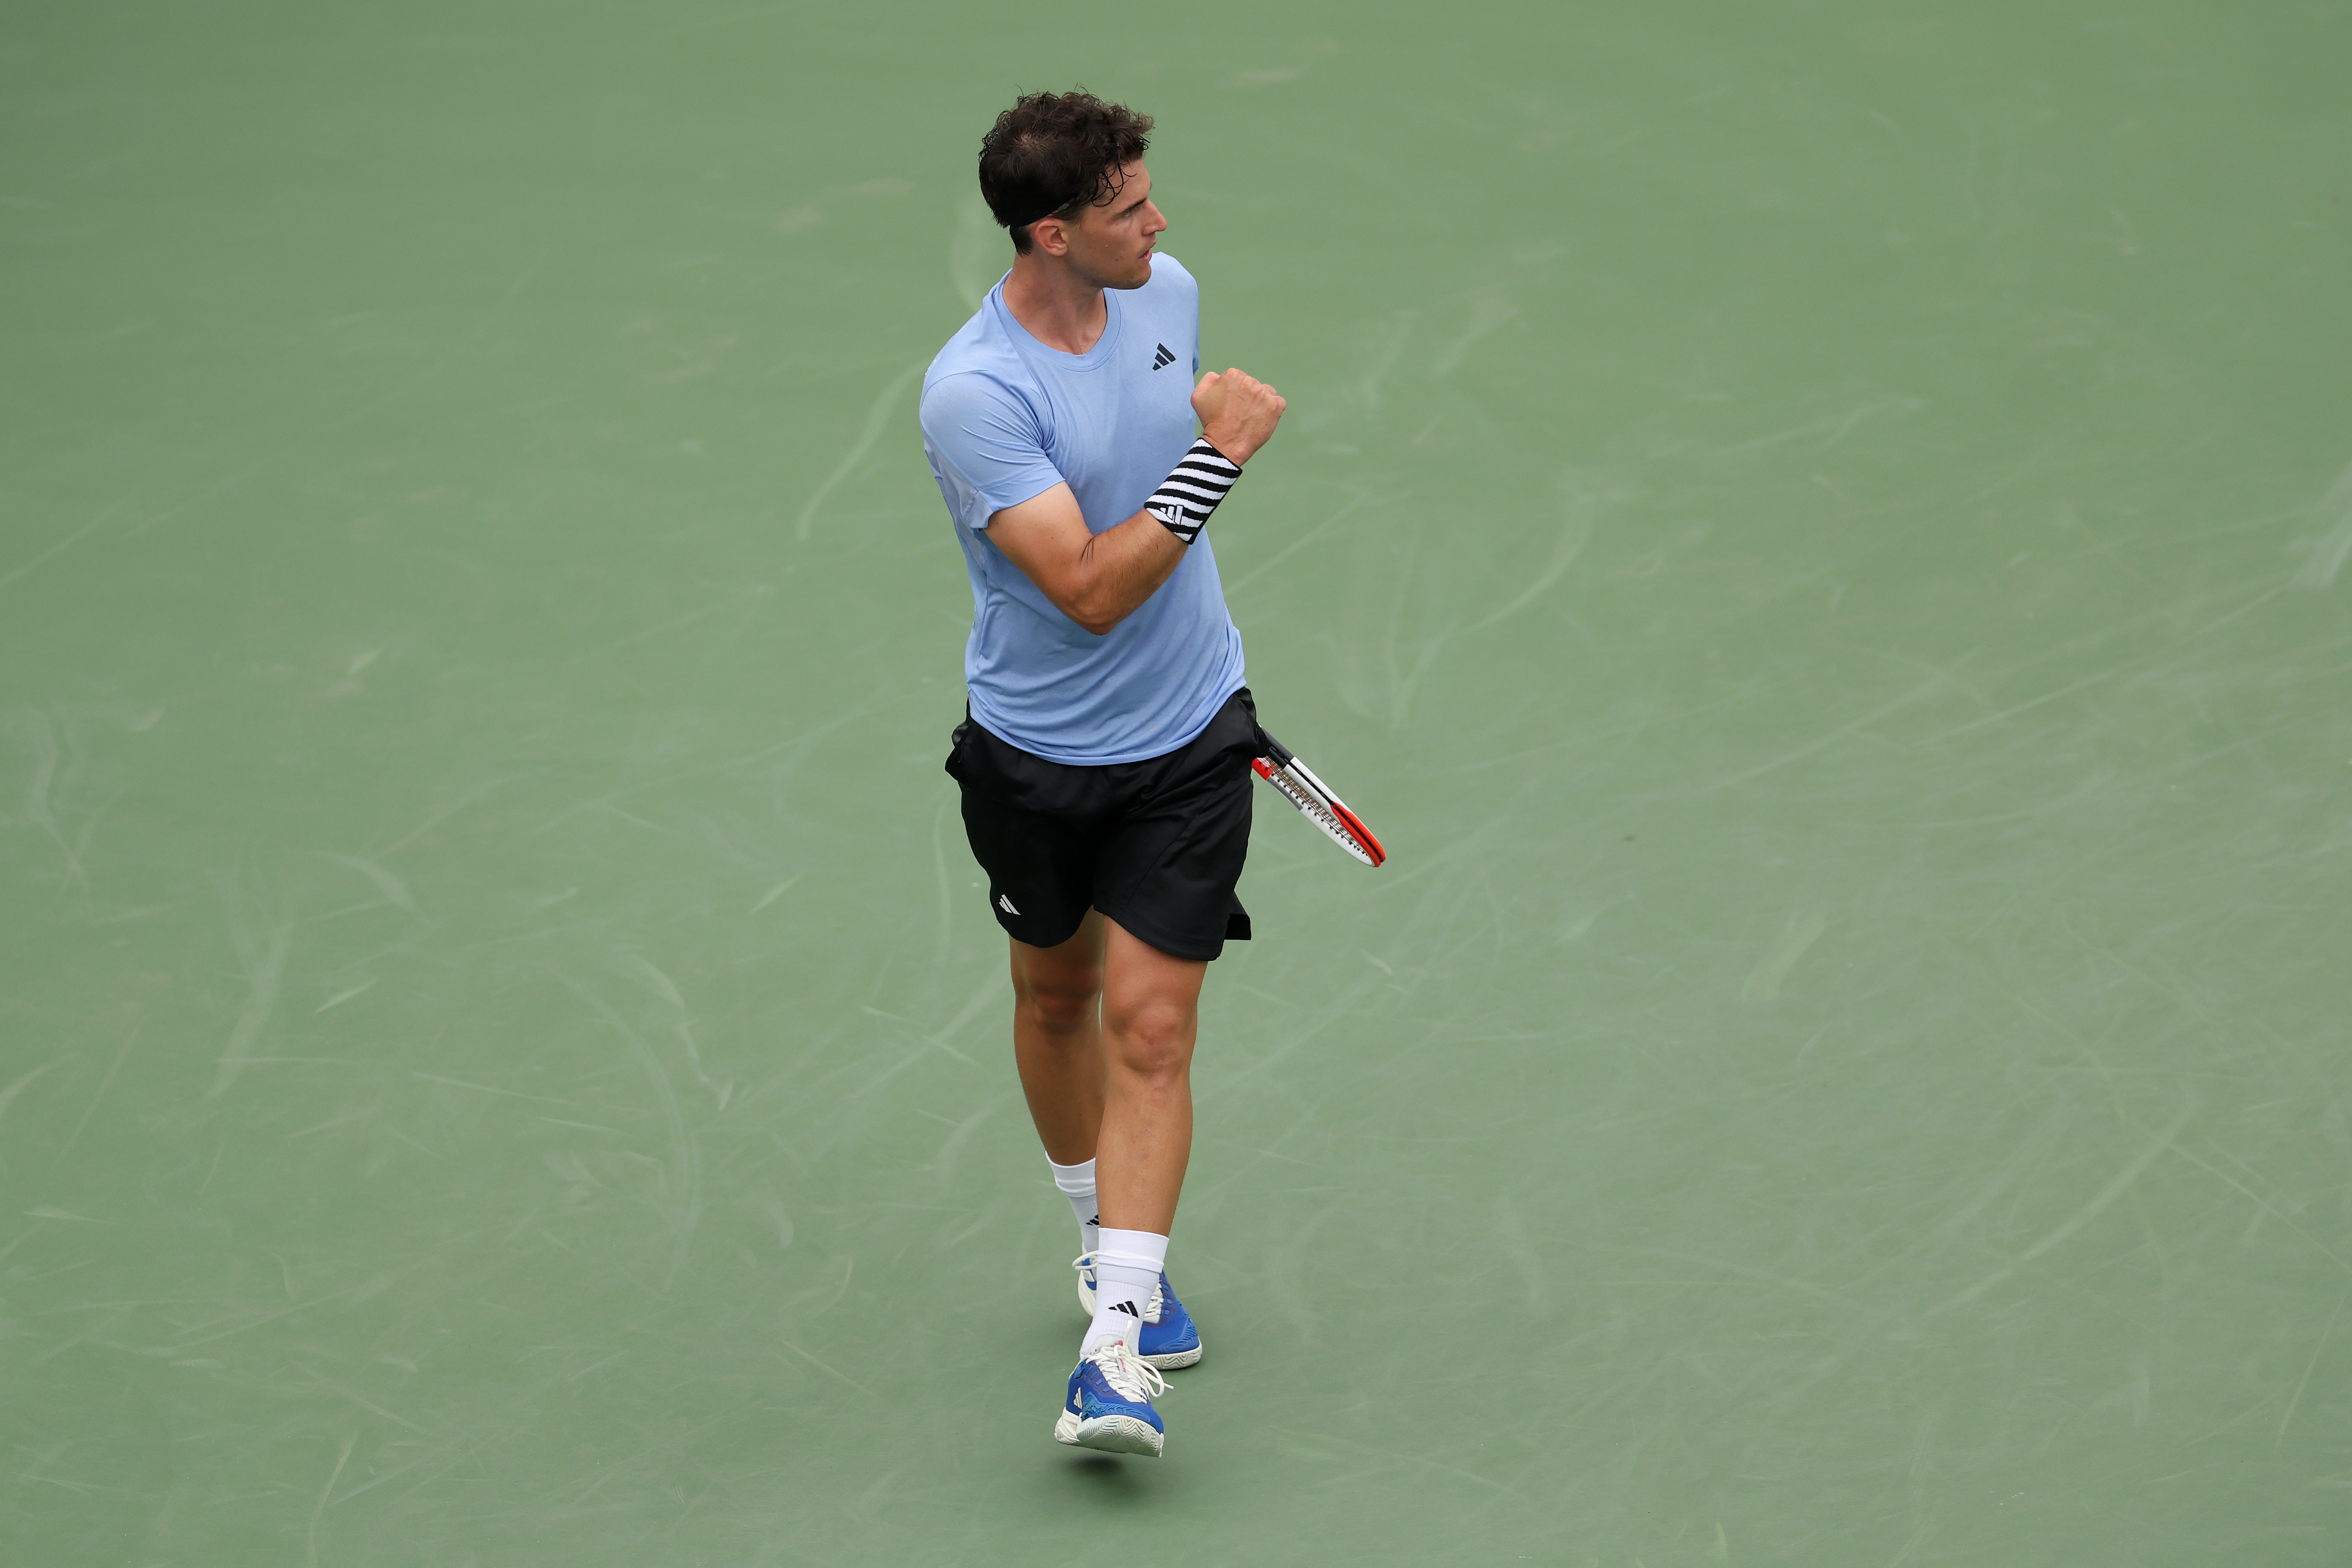 Dominic Thiem wins first US Open match since 2020 final, snapping seven- match losing streak at Slams